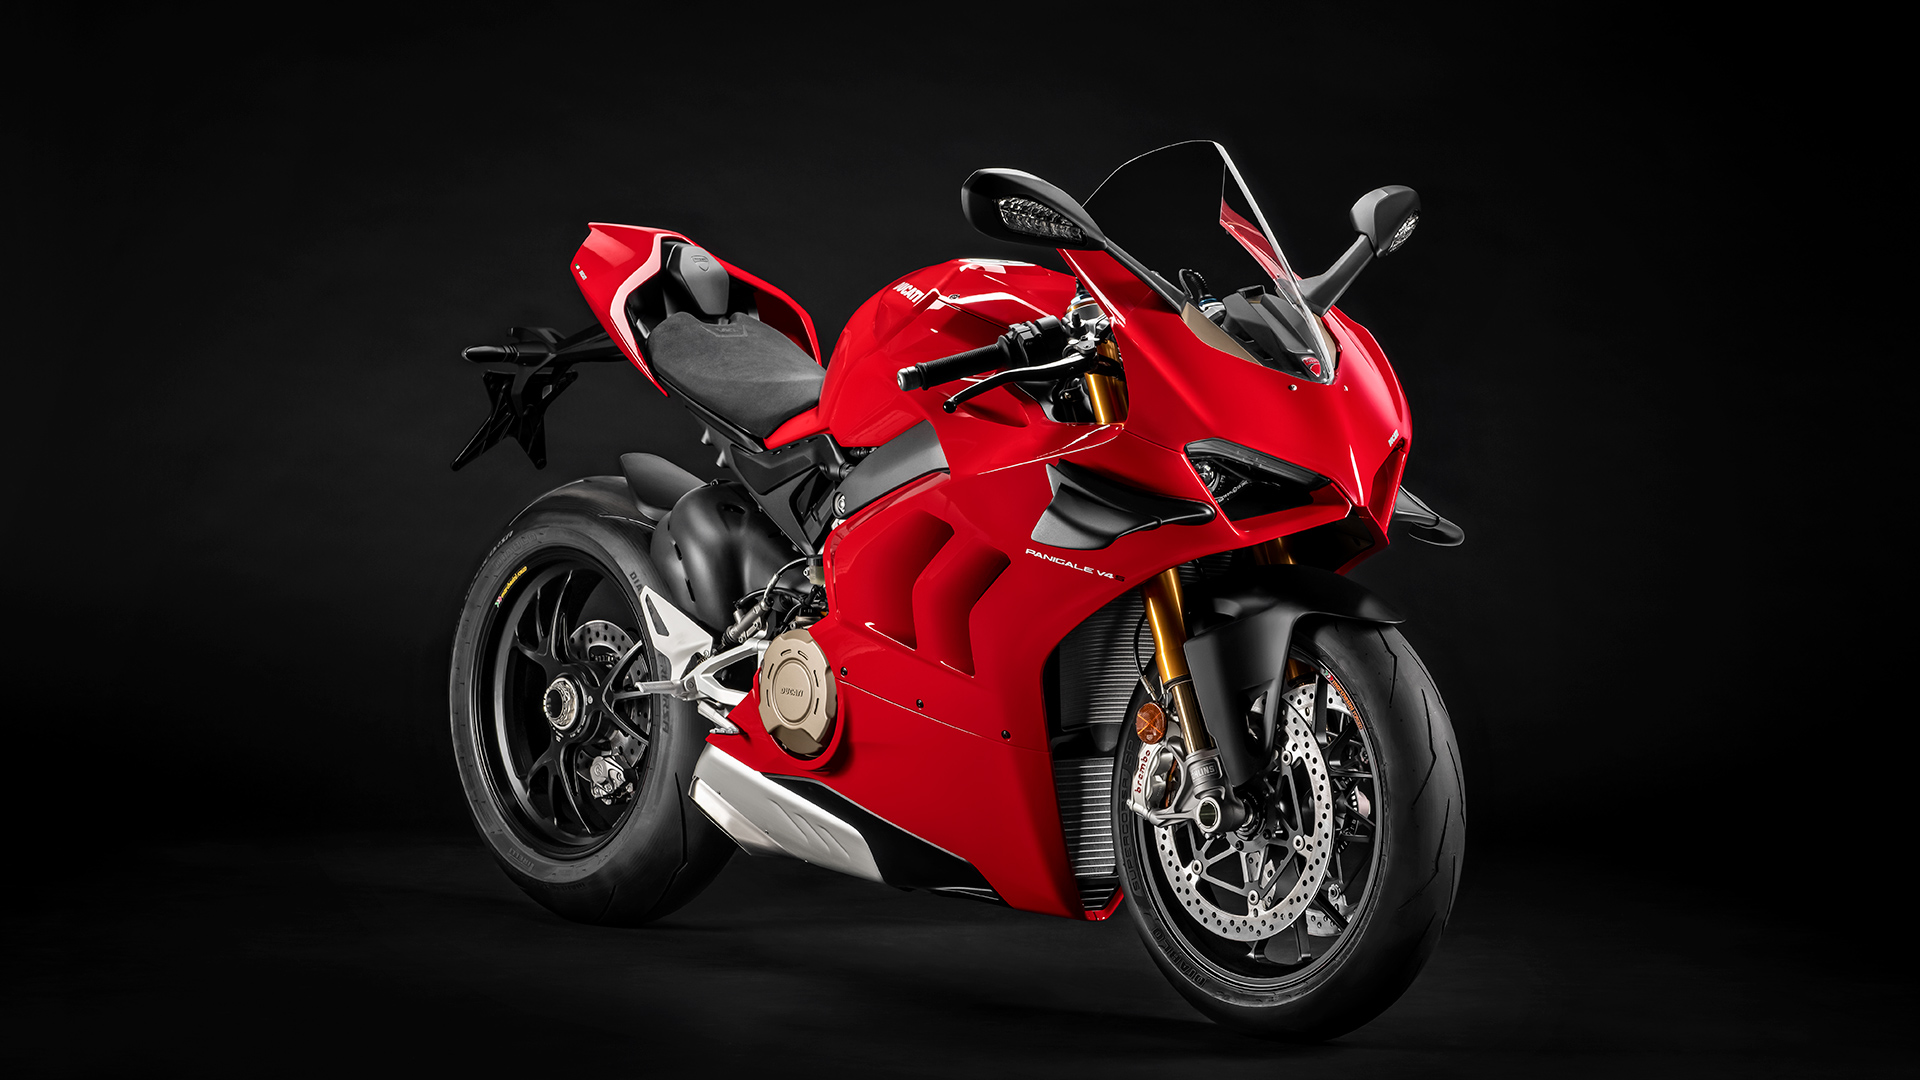 Panigale-V4-S-MY20-Red-03-Gallery-1920x1080